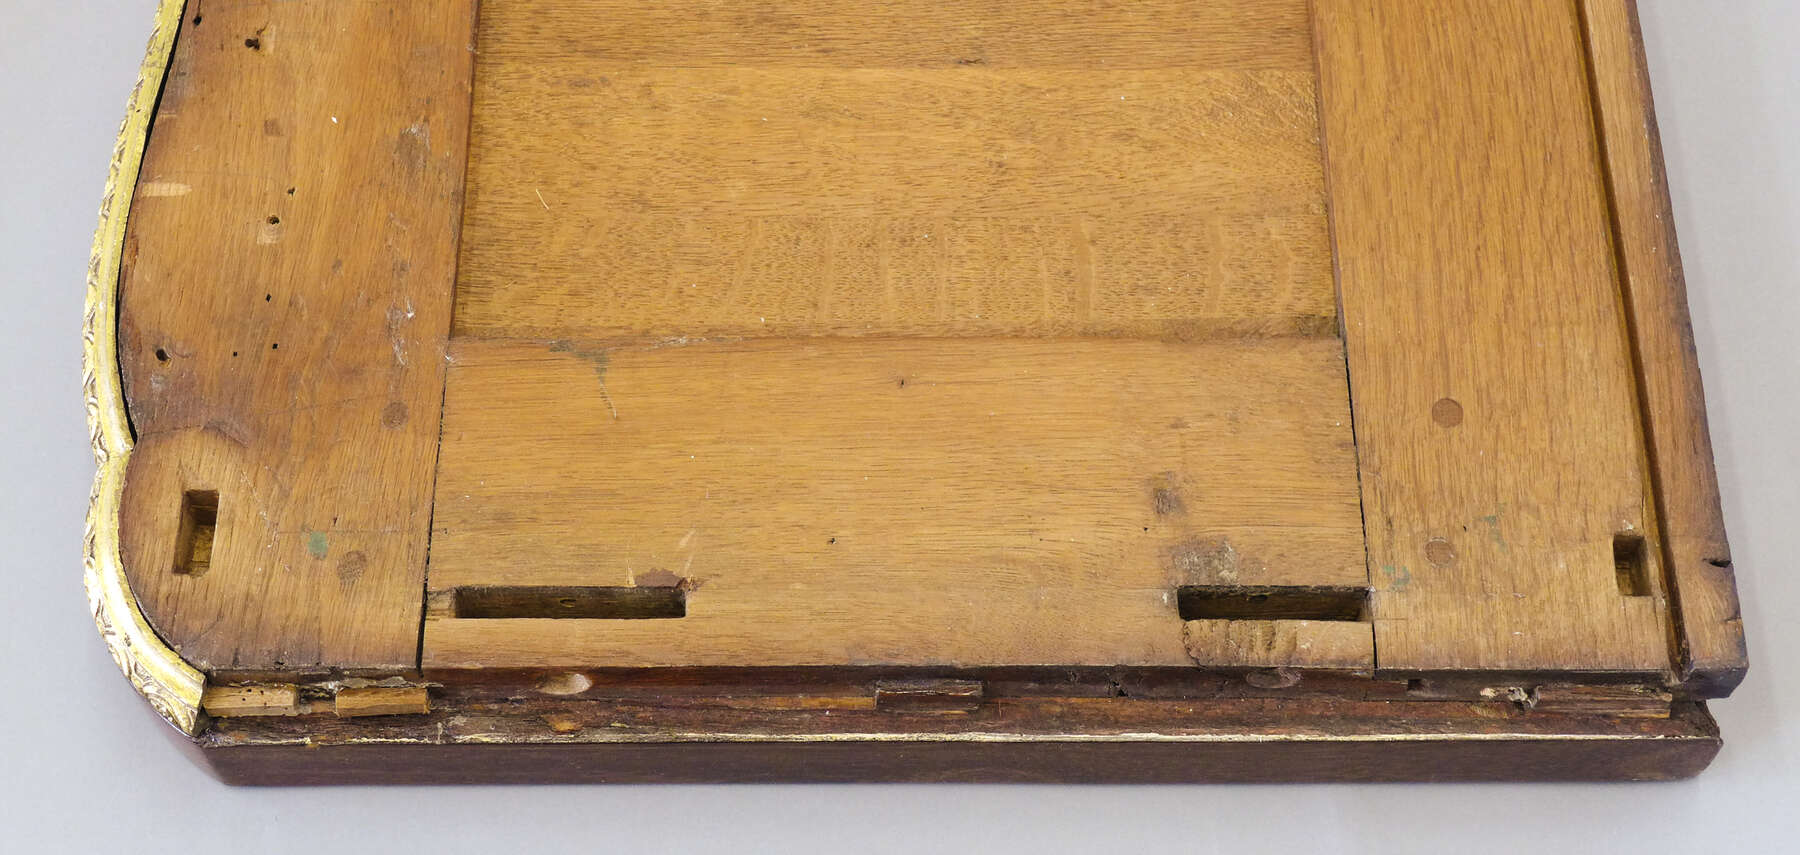 a detail of the underside of the cabinet top shows two vertical wooden panels and one horizontal wooden panel with four rectangular gaps near the edges used to join the top of the cabinet to the bottom